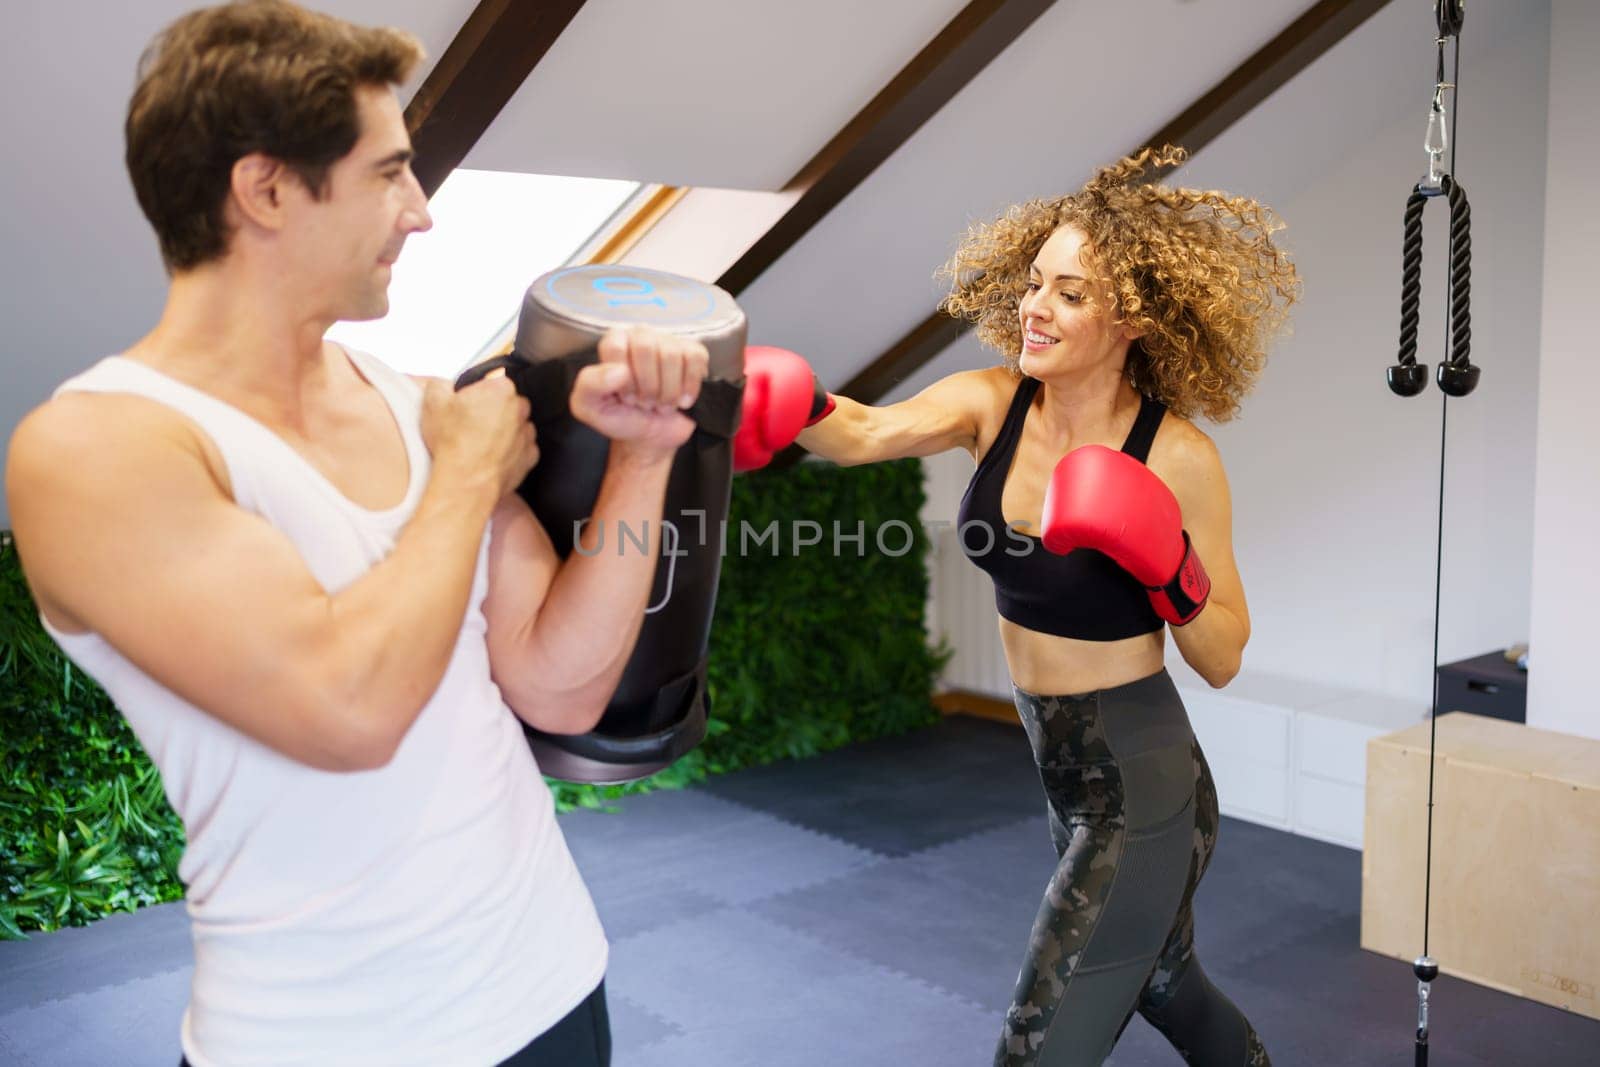 Strong sportswoman punching bag during workout with personal coach by javiindy